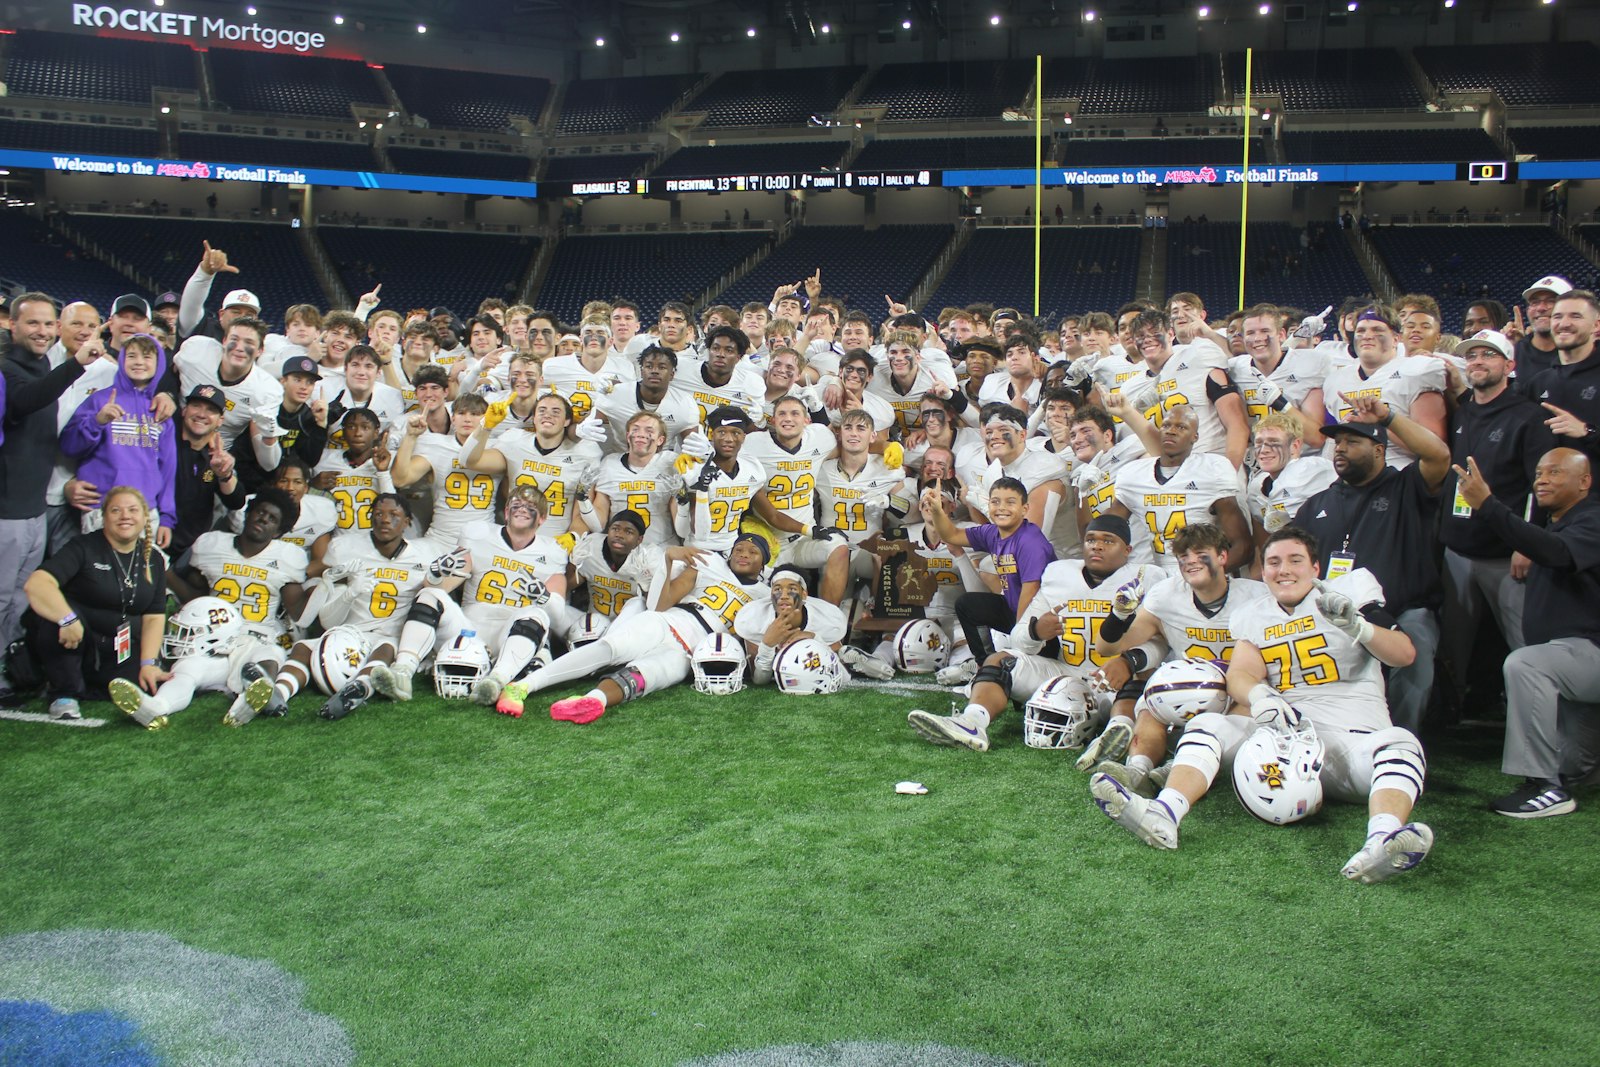 The Warren DeLaSalle football team gathers in the middle of Ford Field to celebrate after winning its second straight state championship, and fifth since 2014.